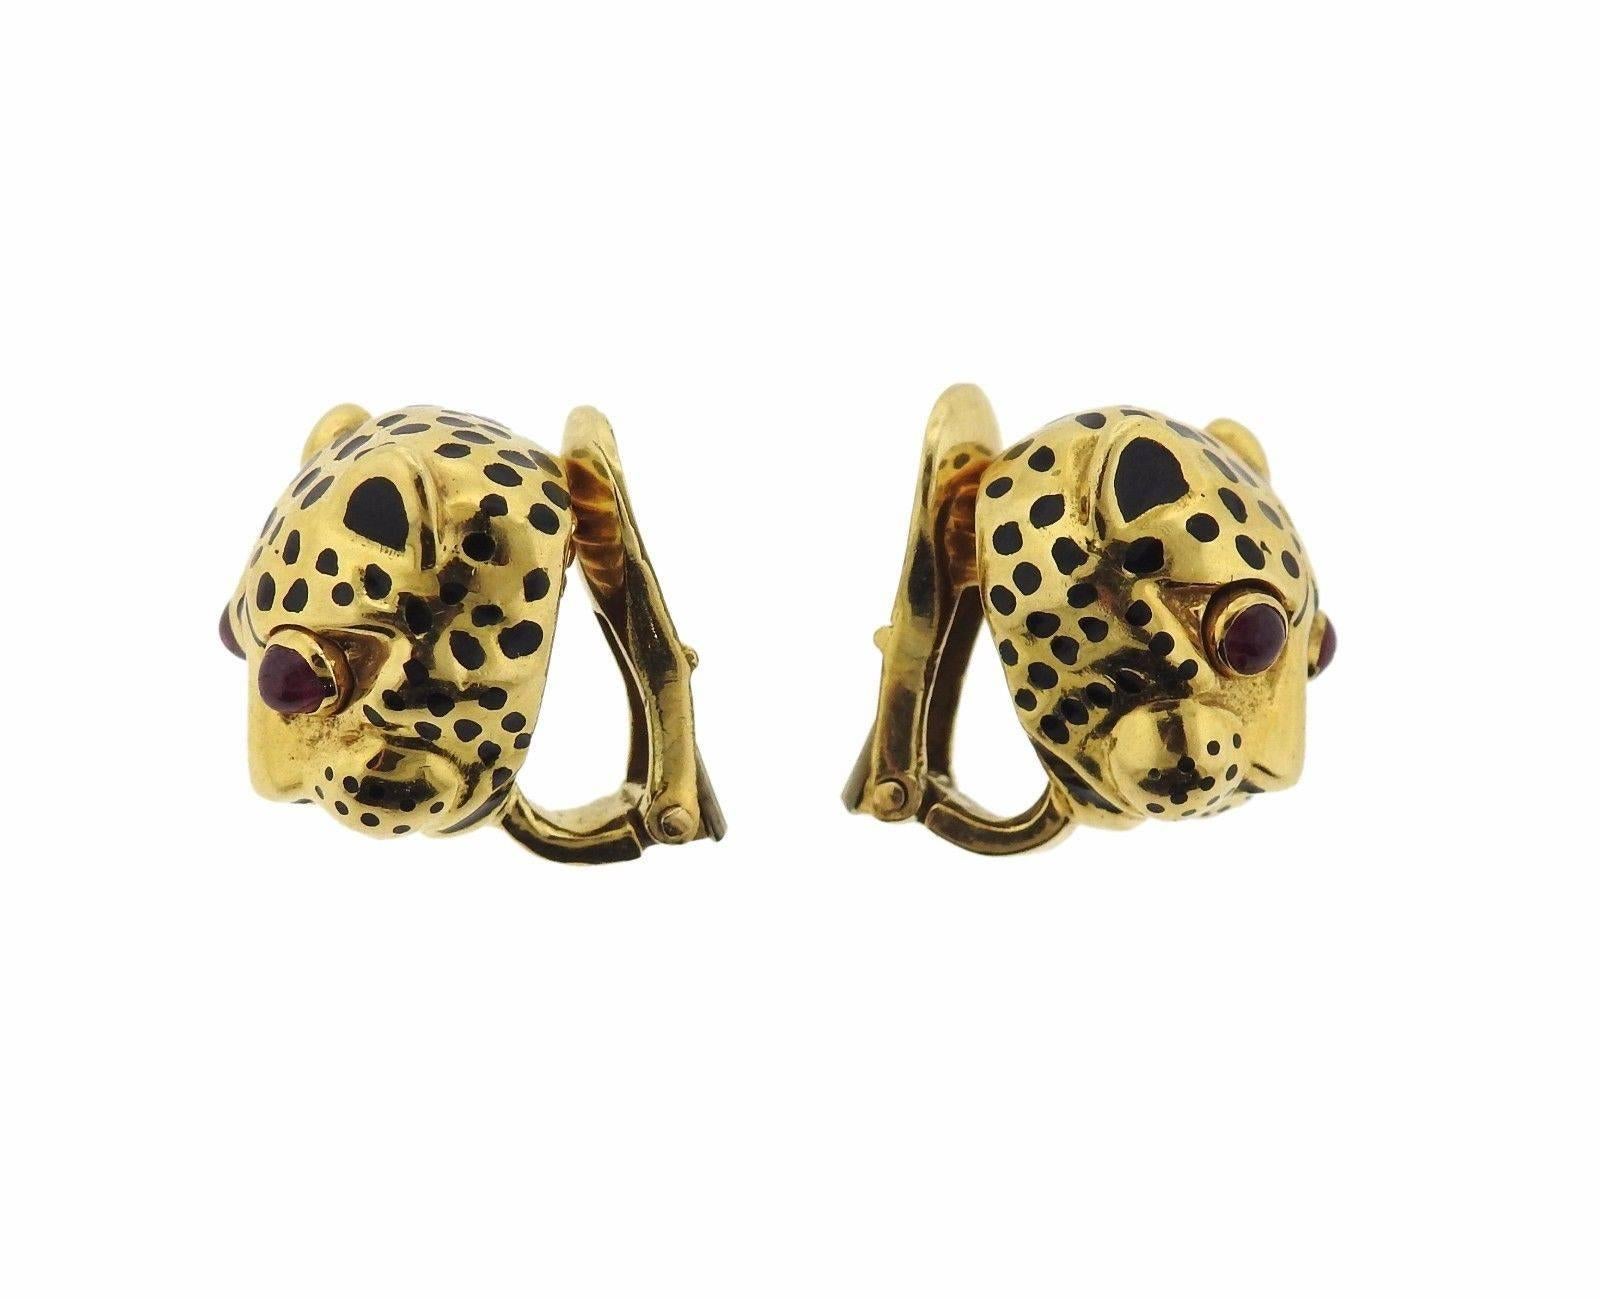 A pair of 18k gold earrings depicting leopards, with ruby cabochons for eyes.  The earrings measure 14.7mm x 12mm and weigh 13.8 grams.  Marked: WEBB 18K.  The earrings come with a David Webb box.